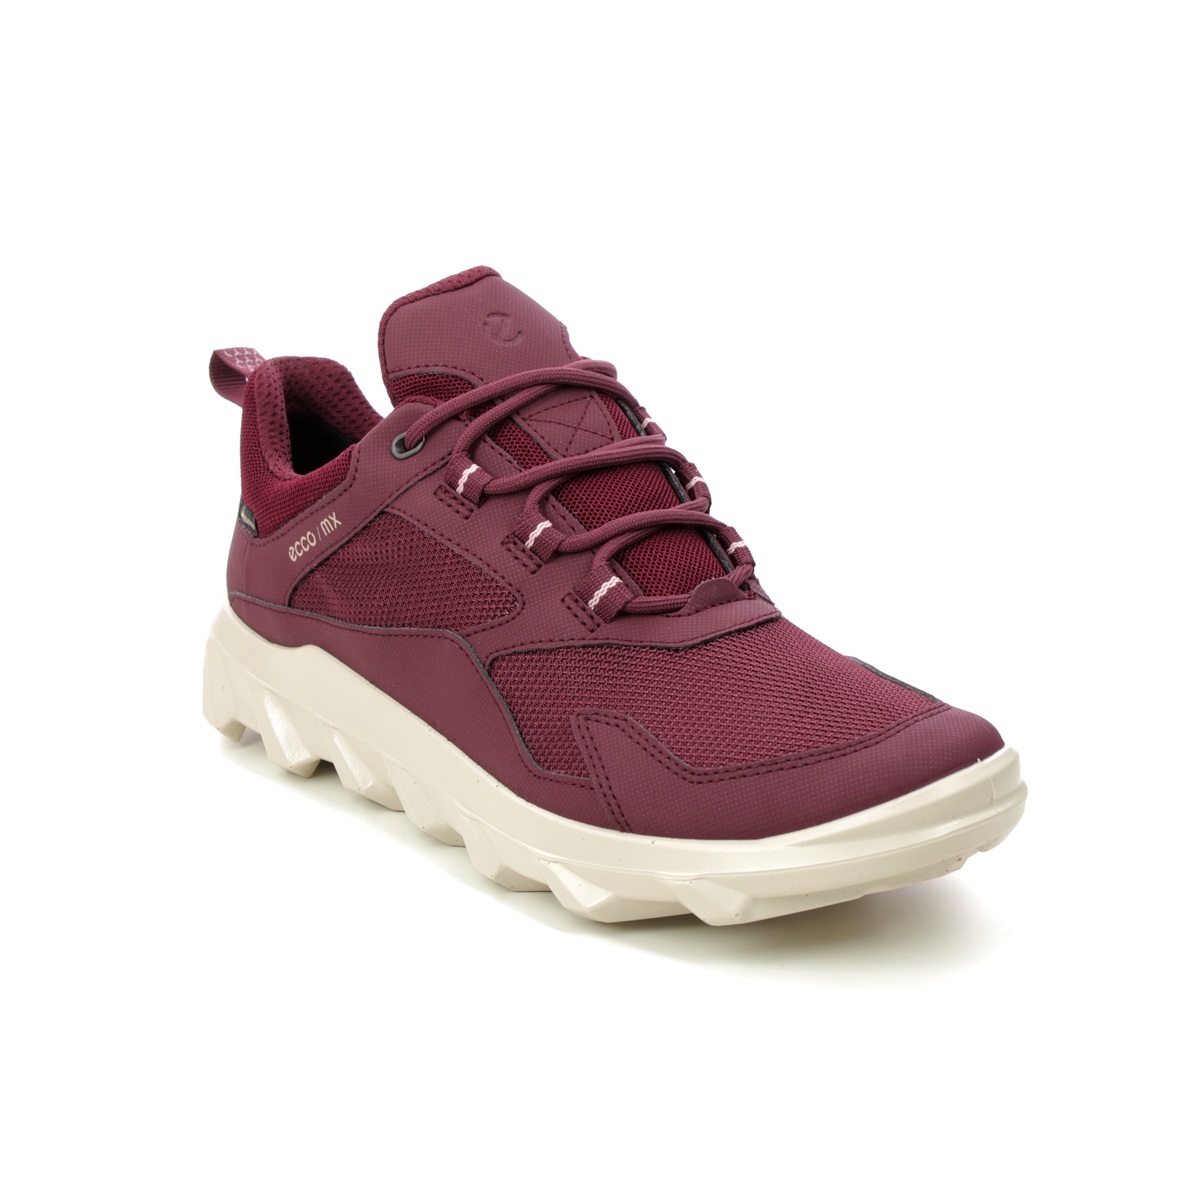 ECCO Mx Womens Gore Plum Womens Walking Shoes 820193-59223 in a Plain Textile in Size 36